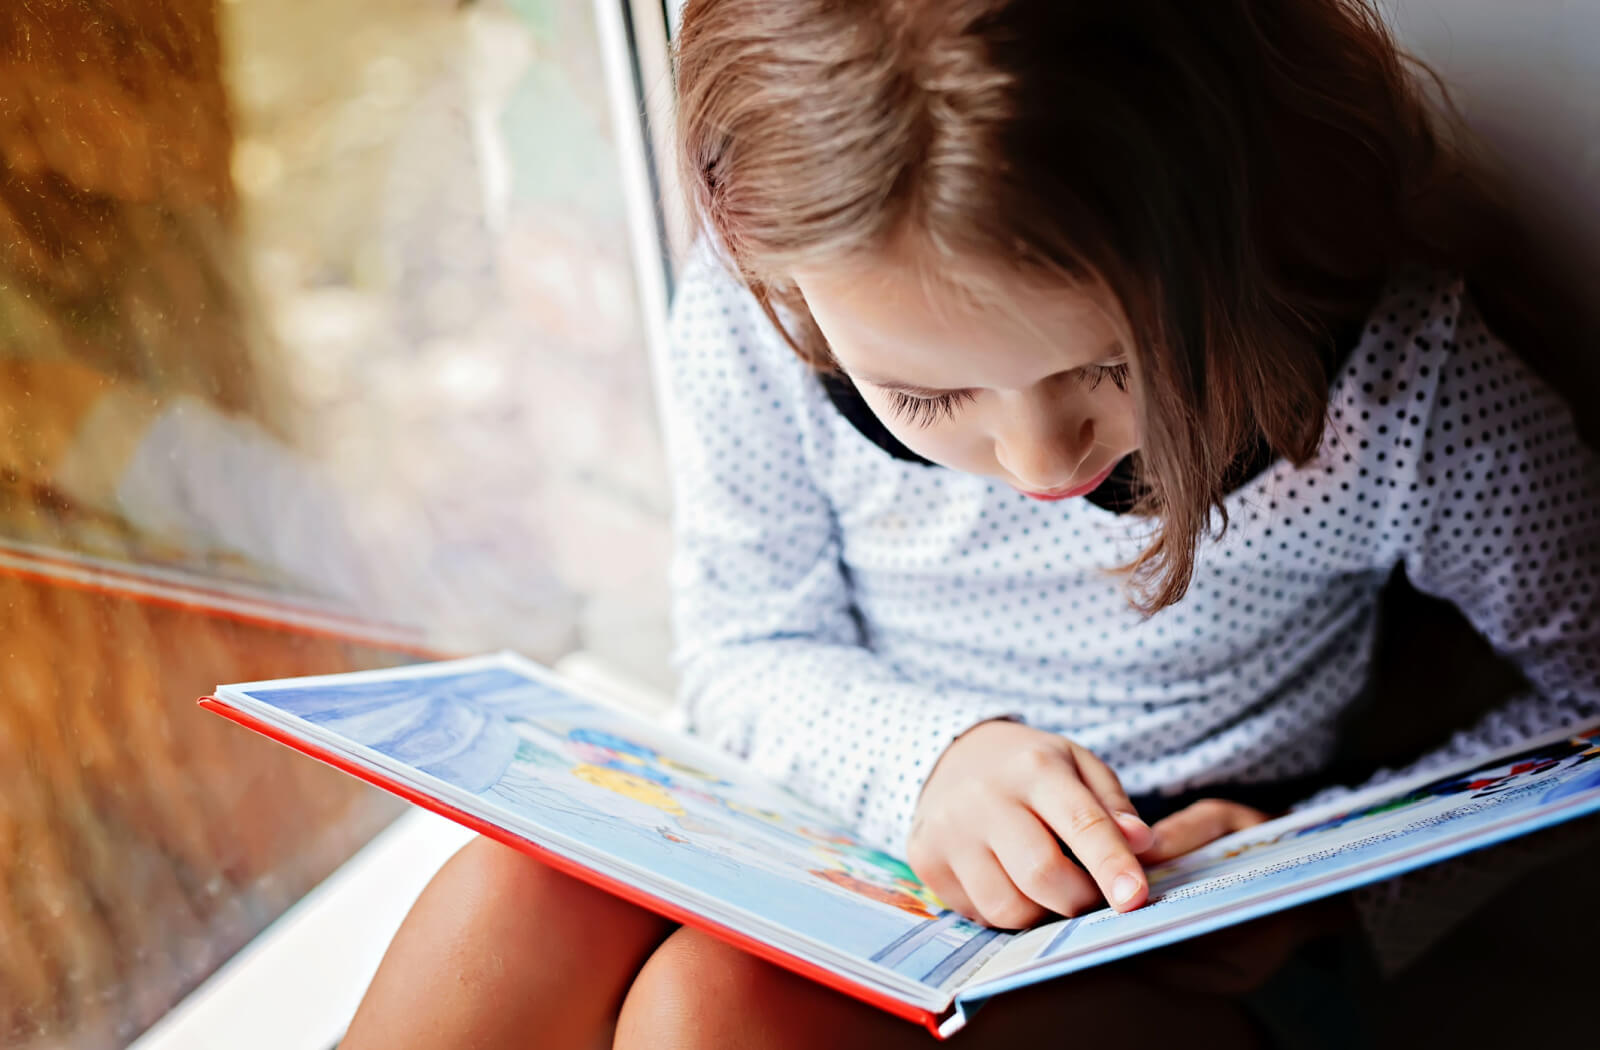 A young girl reading a story book beside a window.